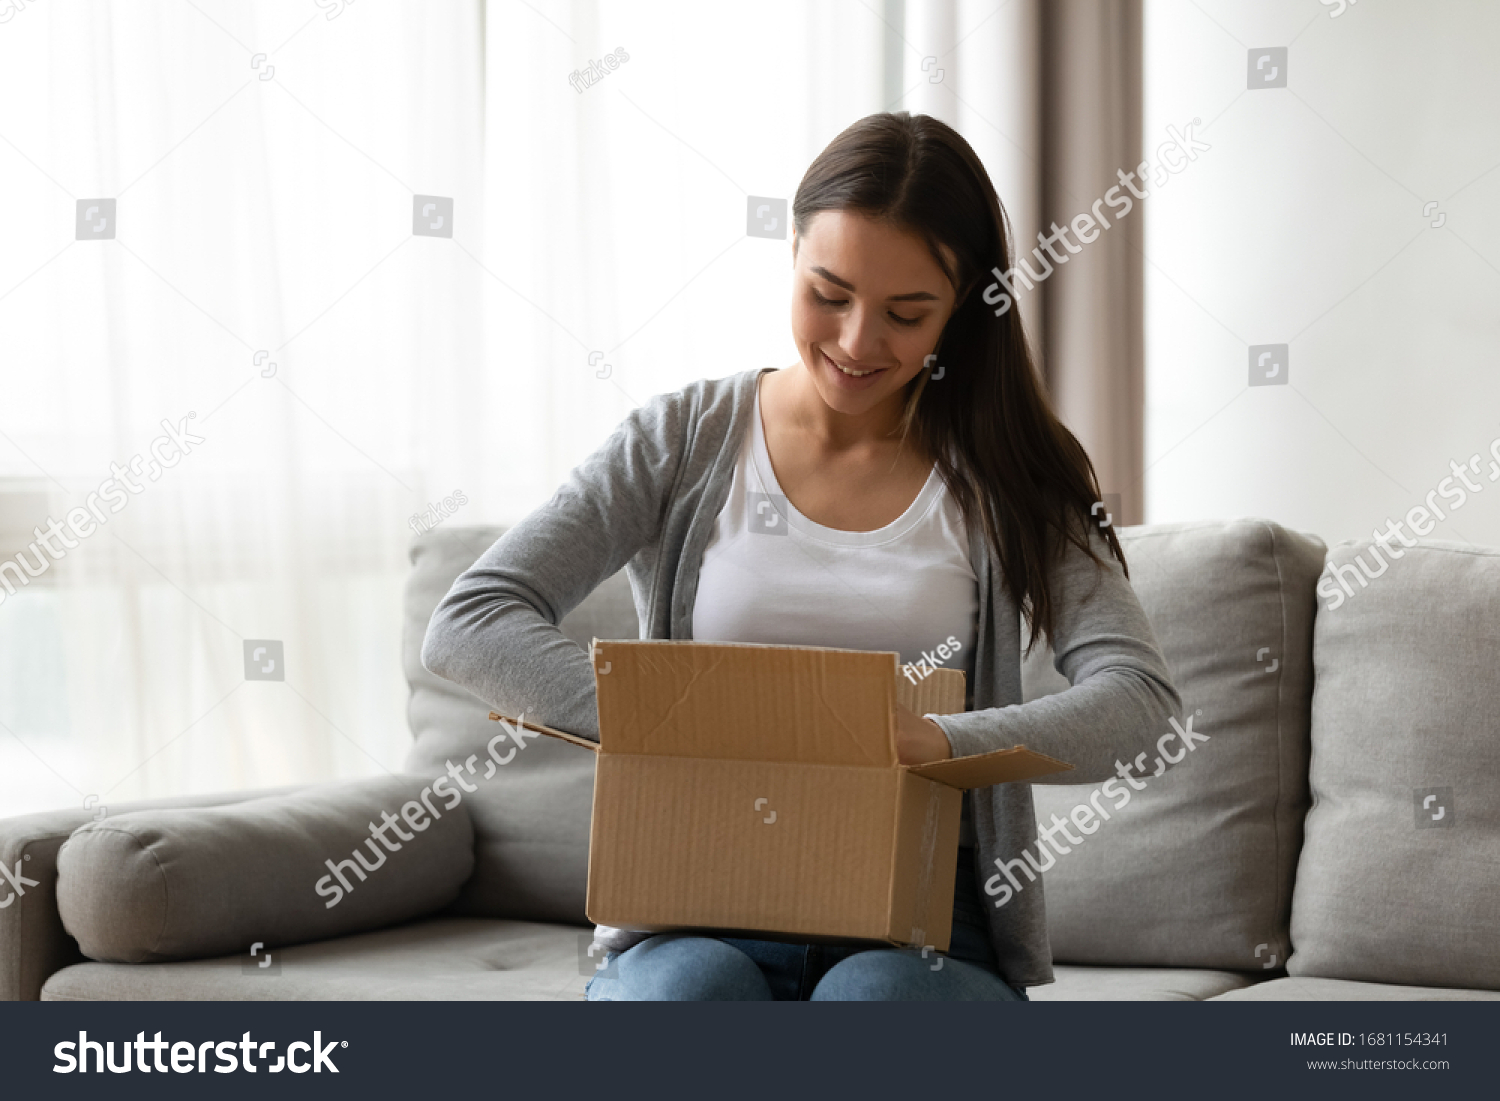 Happy young woman sit on couch in living room unpack cardboard box buying goods on Internet, smiling excited millennial girl open carton parcel order, shopping online, good delivery concept #1681154341